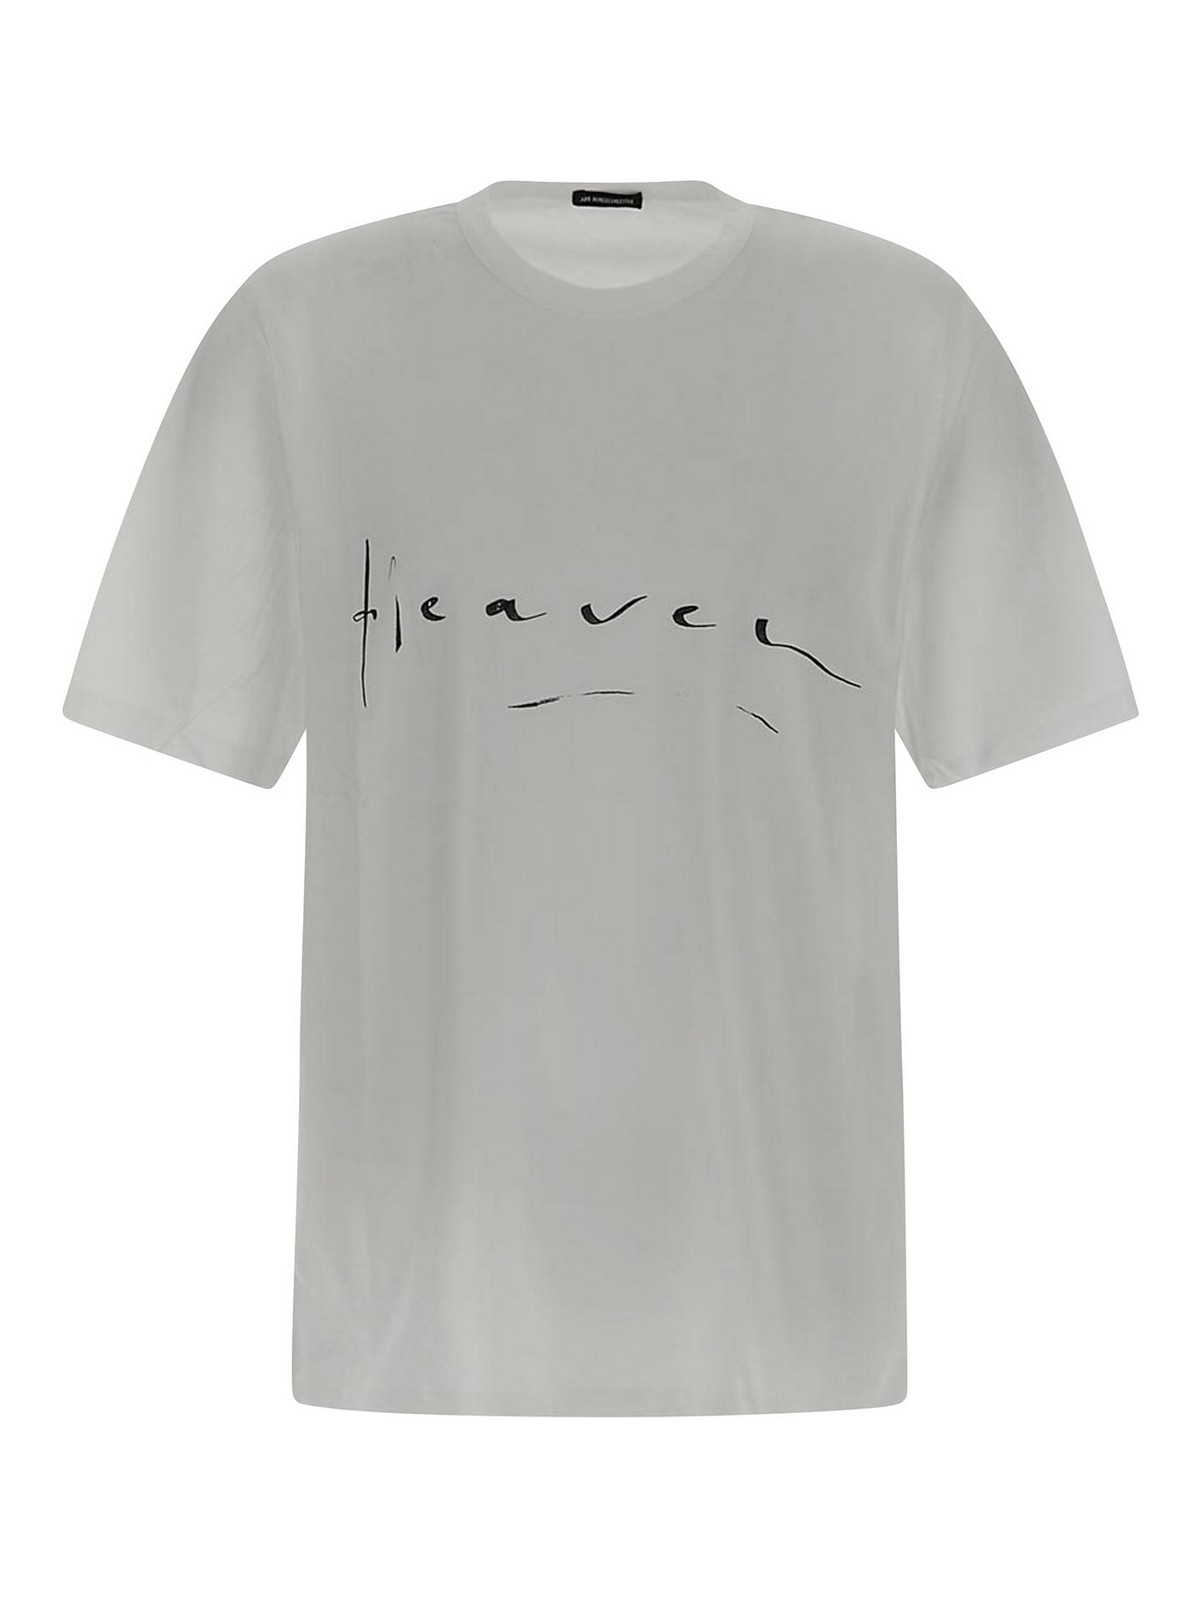 Ann Demeulemeester T-shirt In White With Heaven Lettering Print